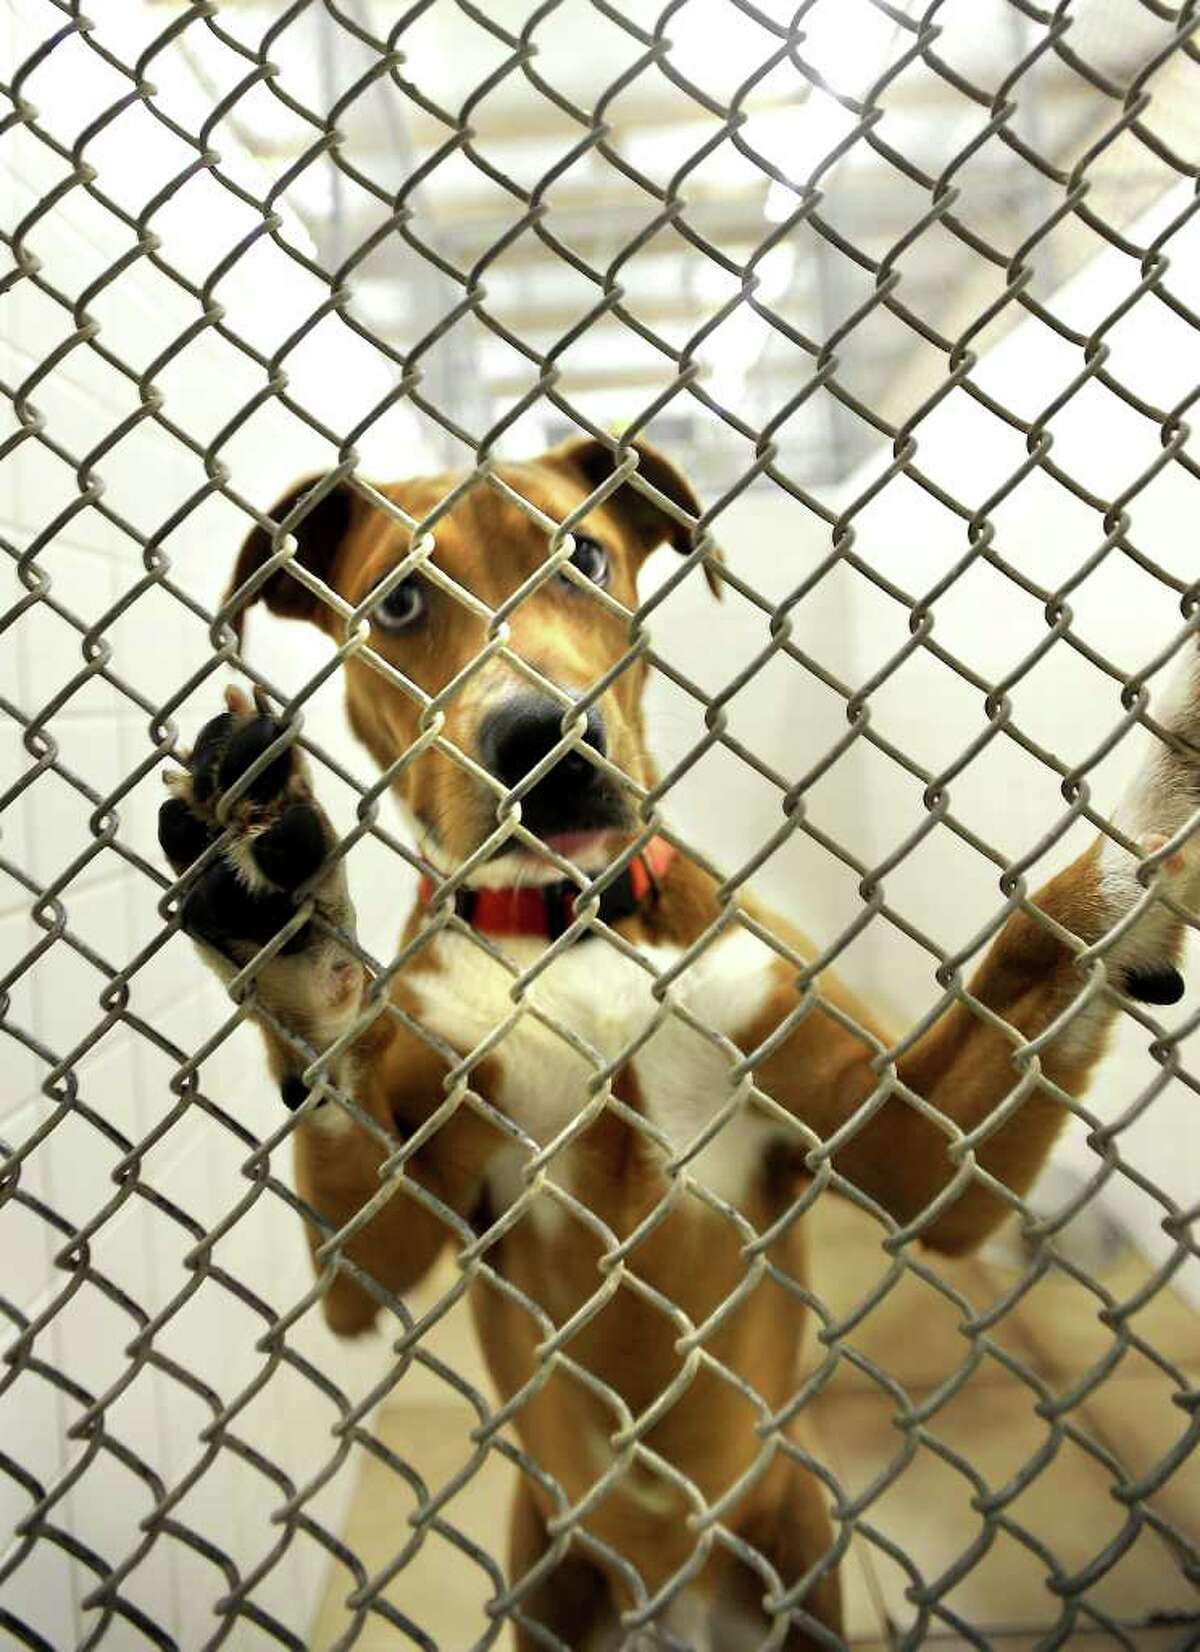 One of the dogs available for adoption looks out his kennel at the Humane Society of Southeast Texas in Beaumont, Thursday. Tammy McKinley/The Enterprise